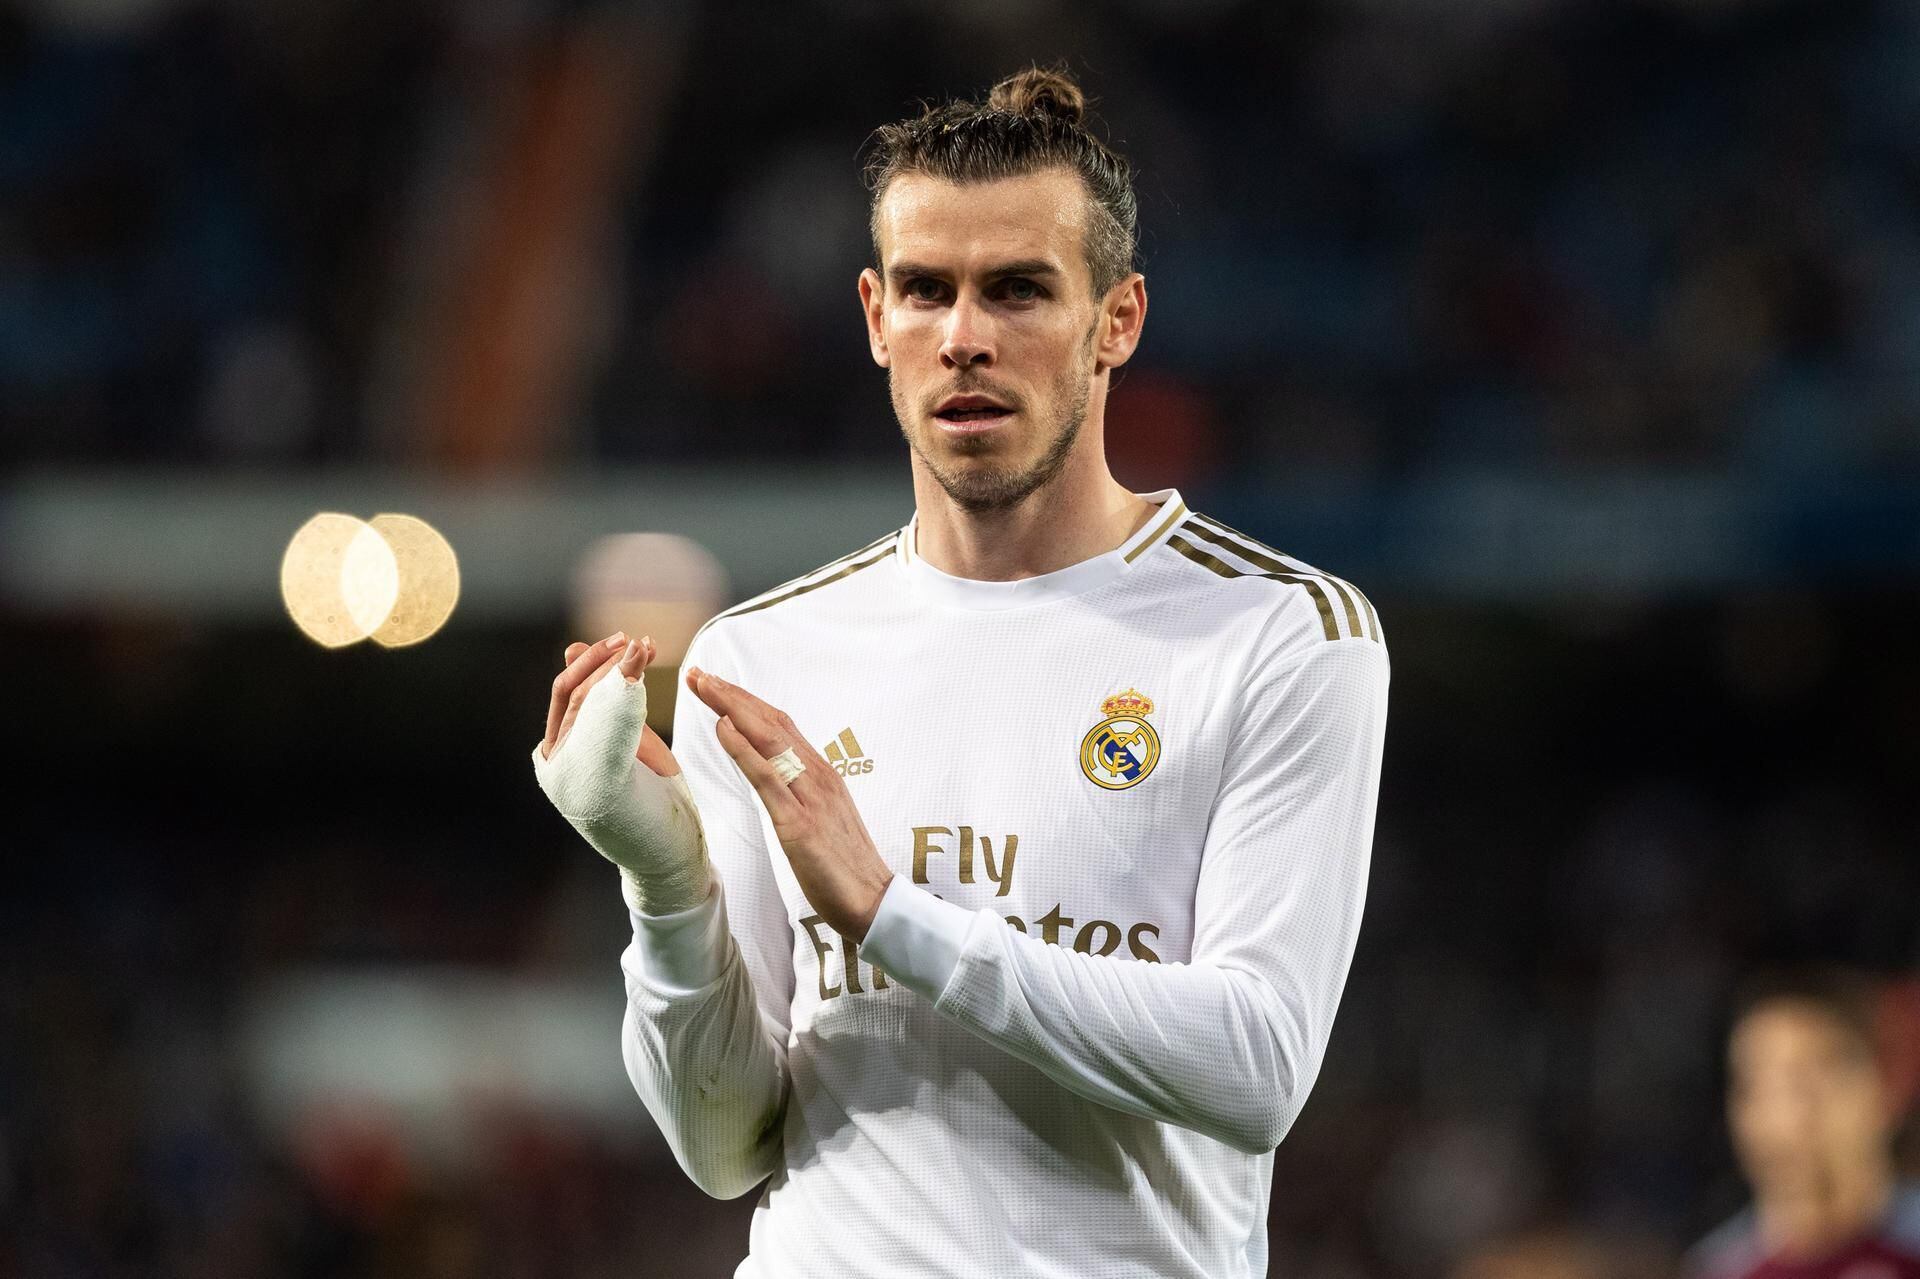 Real Madrid transfer news: Guangzhou deny approach for Gareth Bale